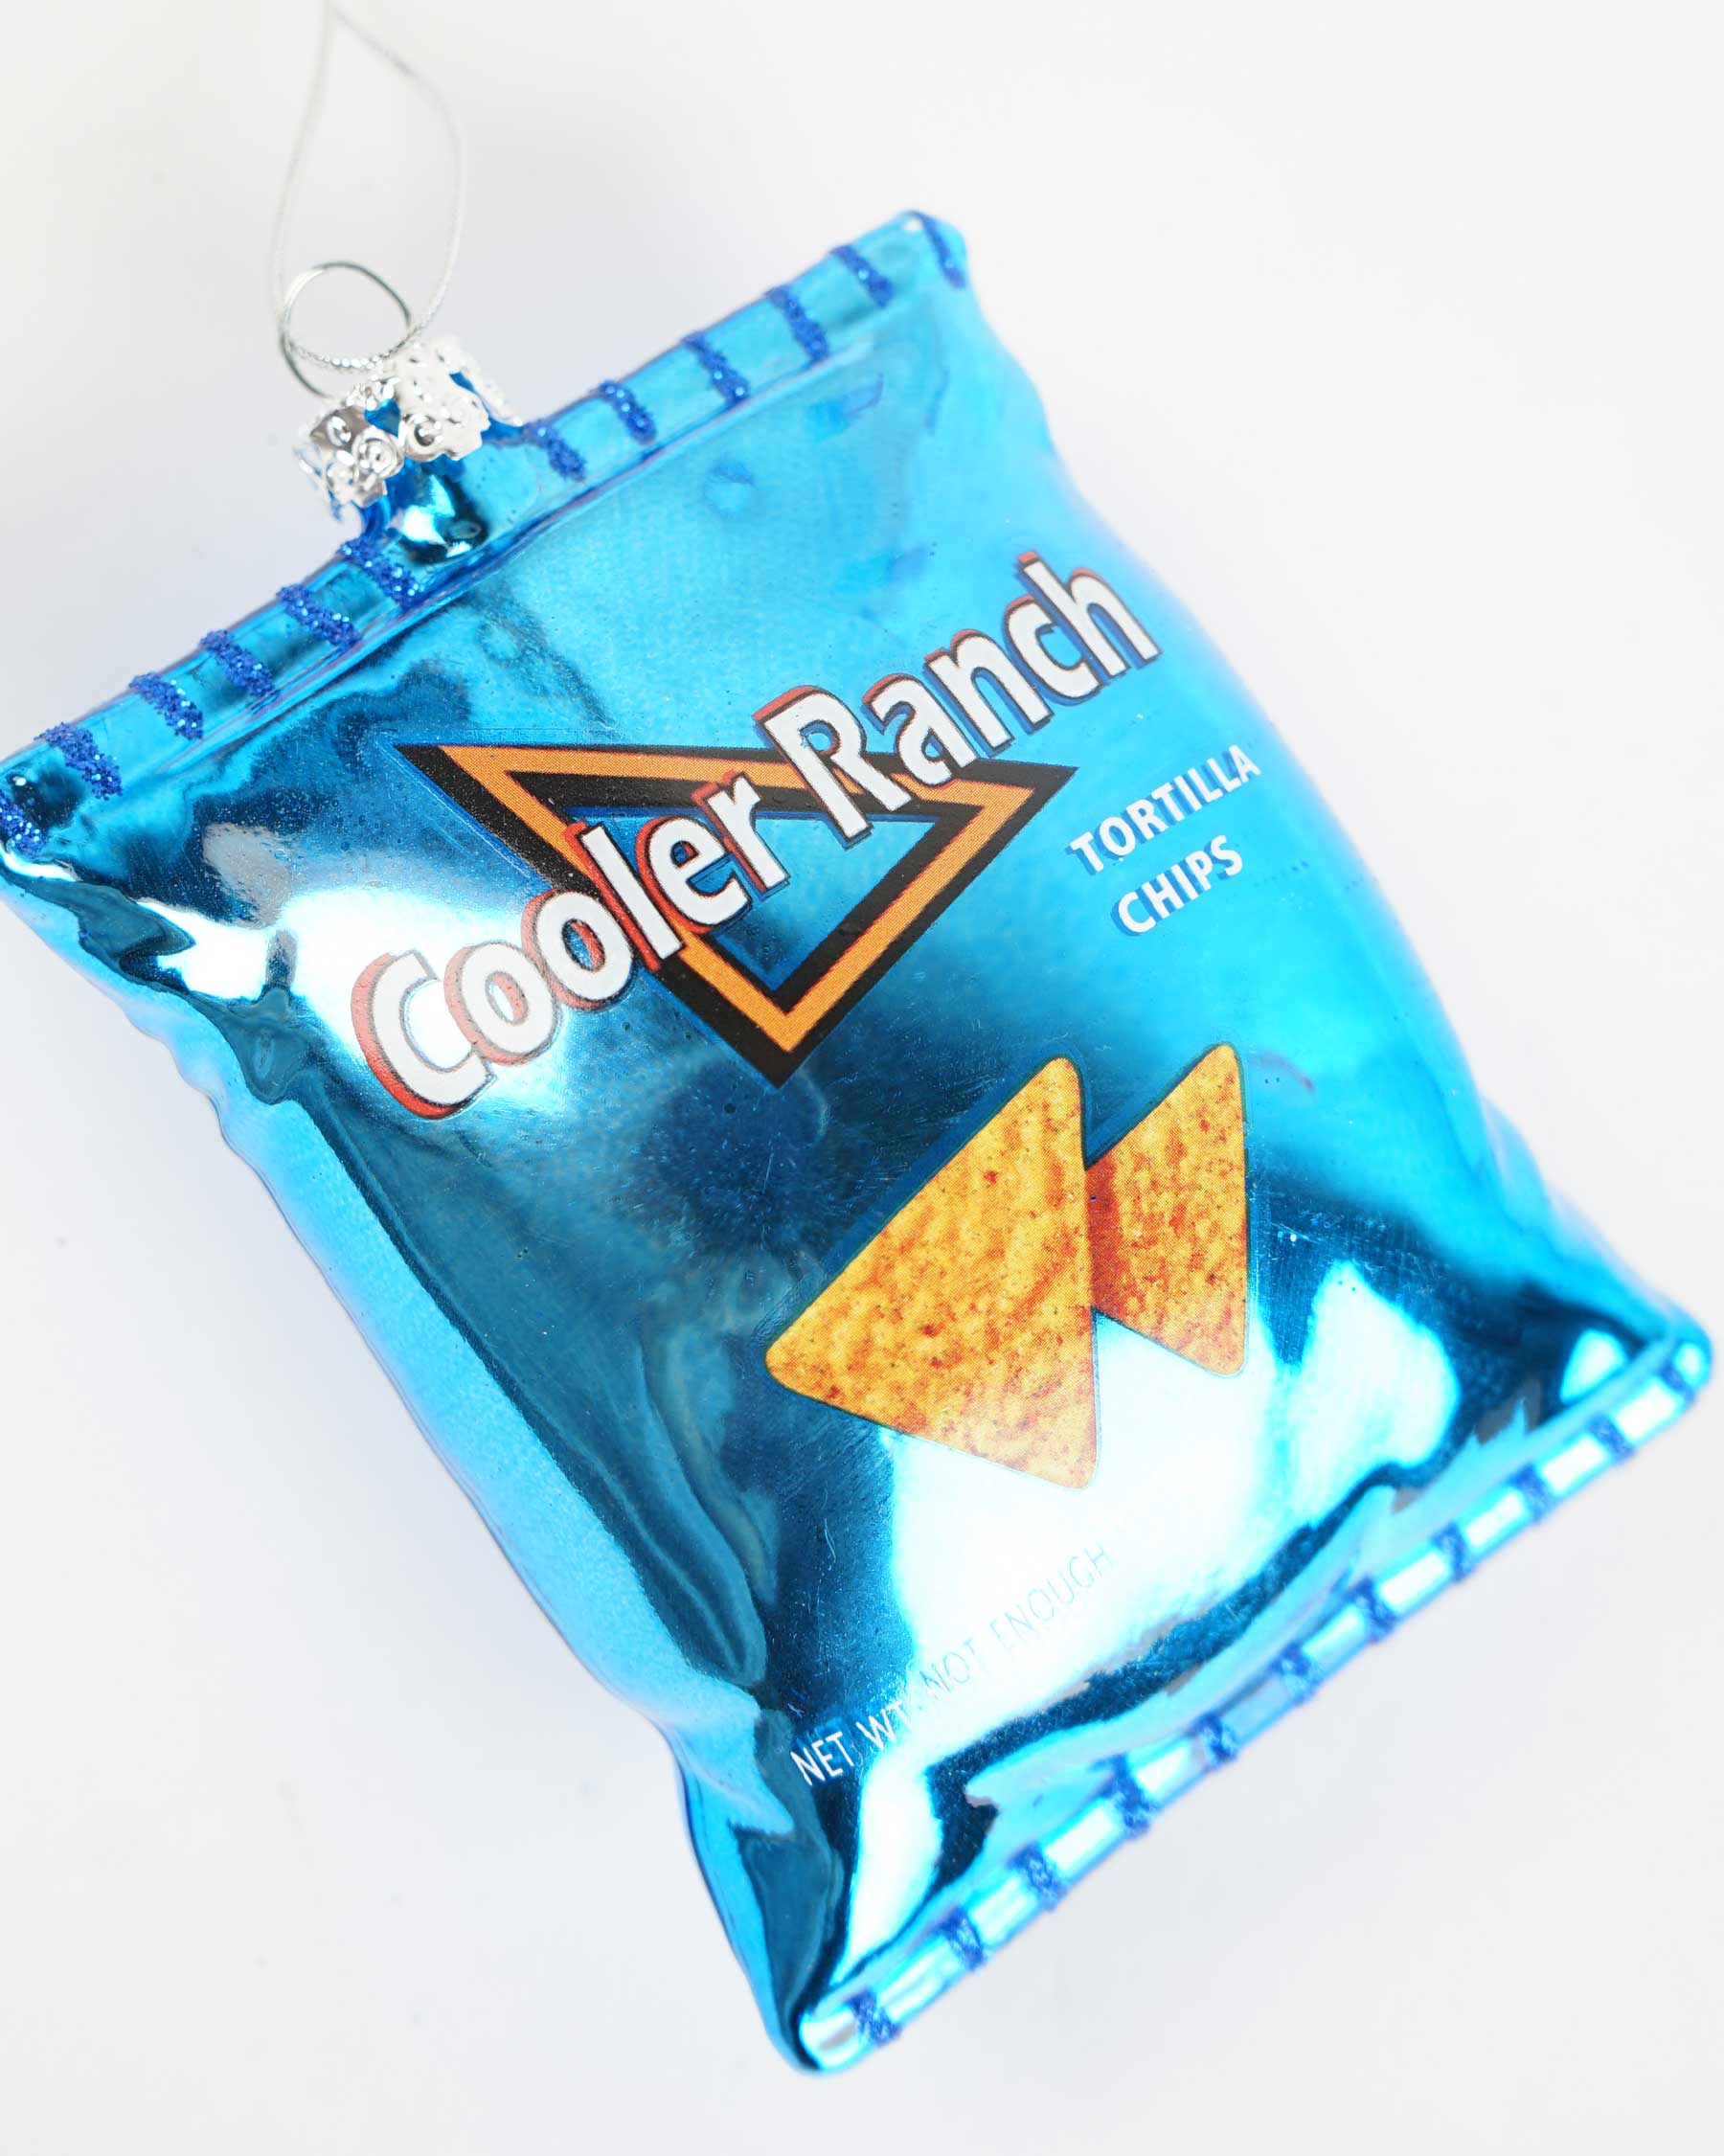 Cooler Ranch Chips Ornament